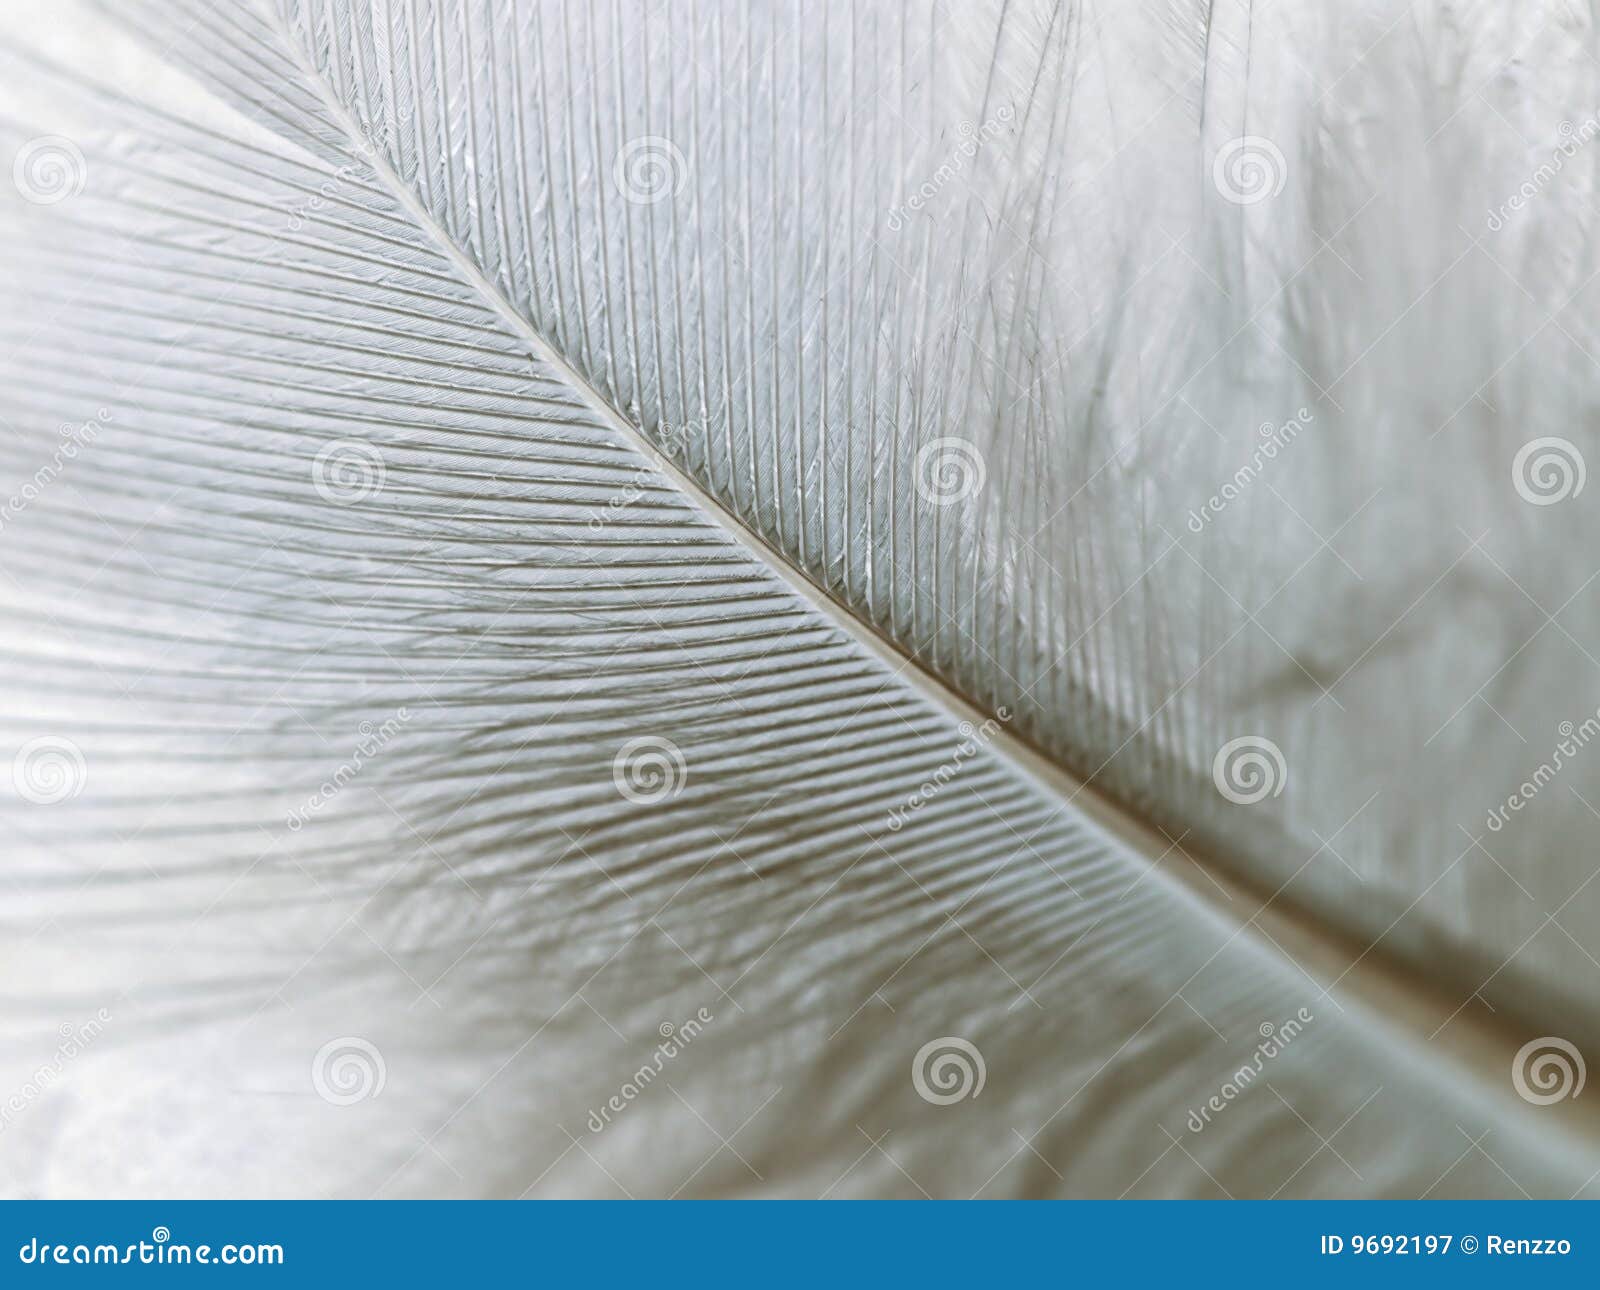 high magnification down feather